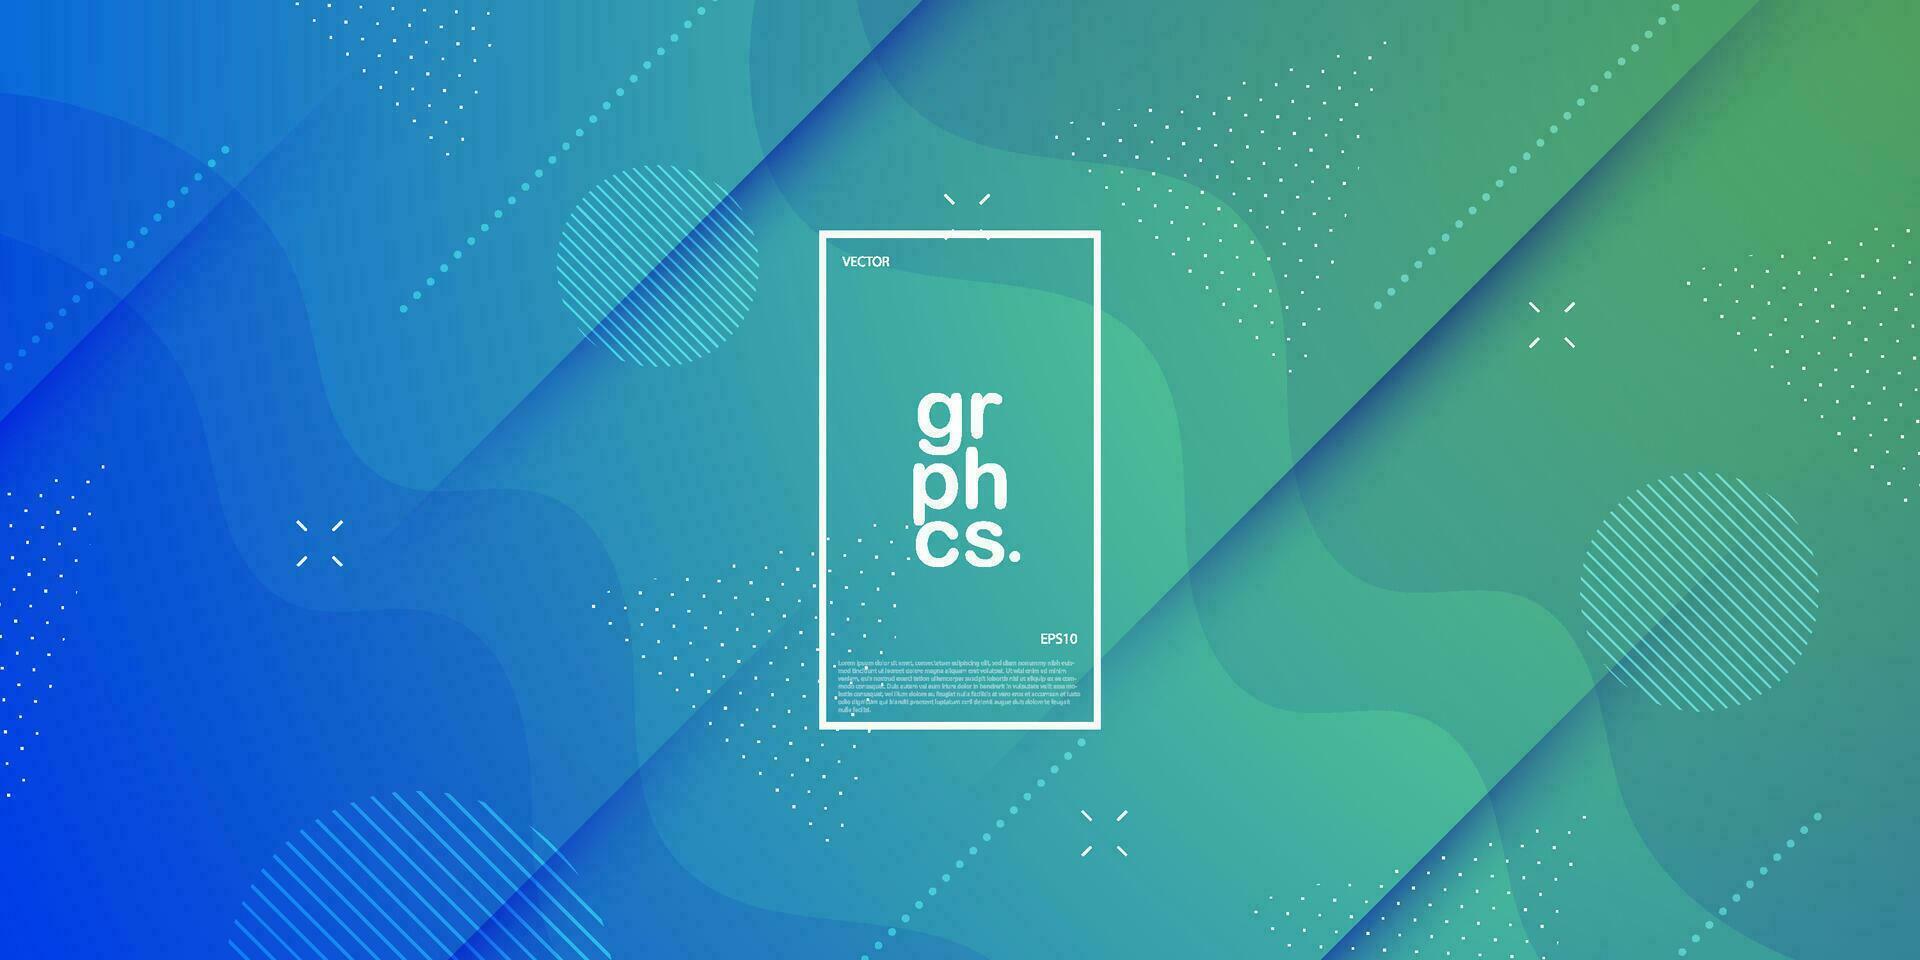 Modern abstract colorful bright blue and green gradient illustration background with simple triangle pattern. Cool banner design. Eps10 vector